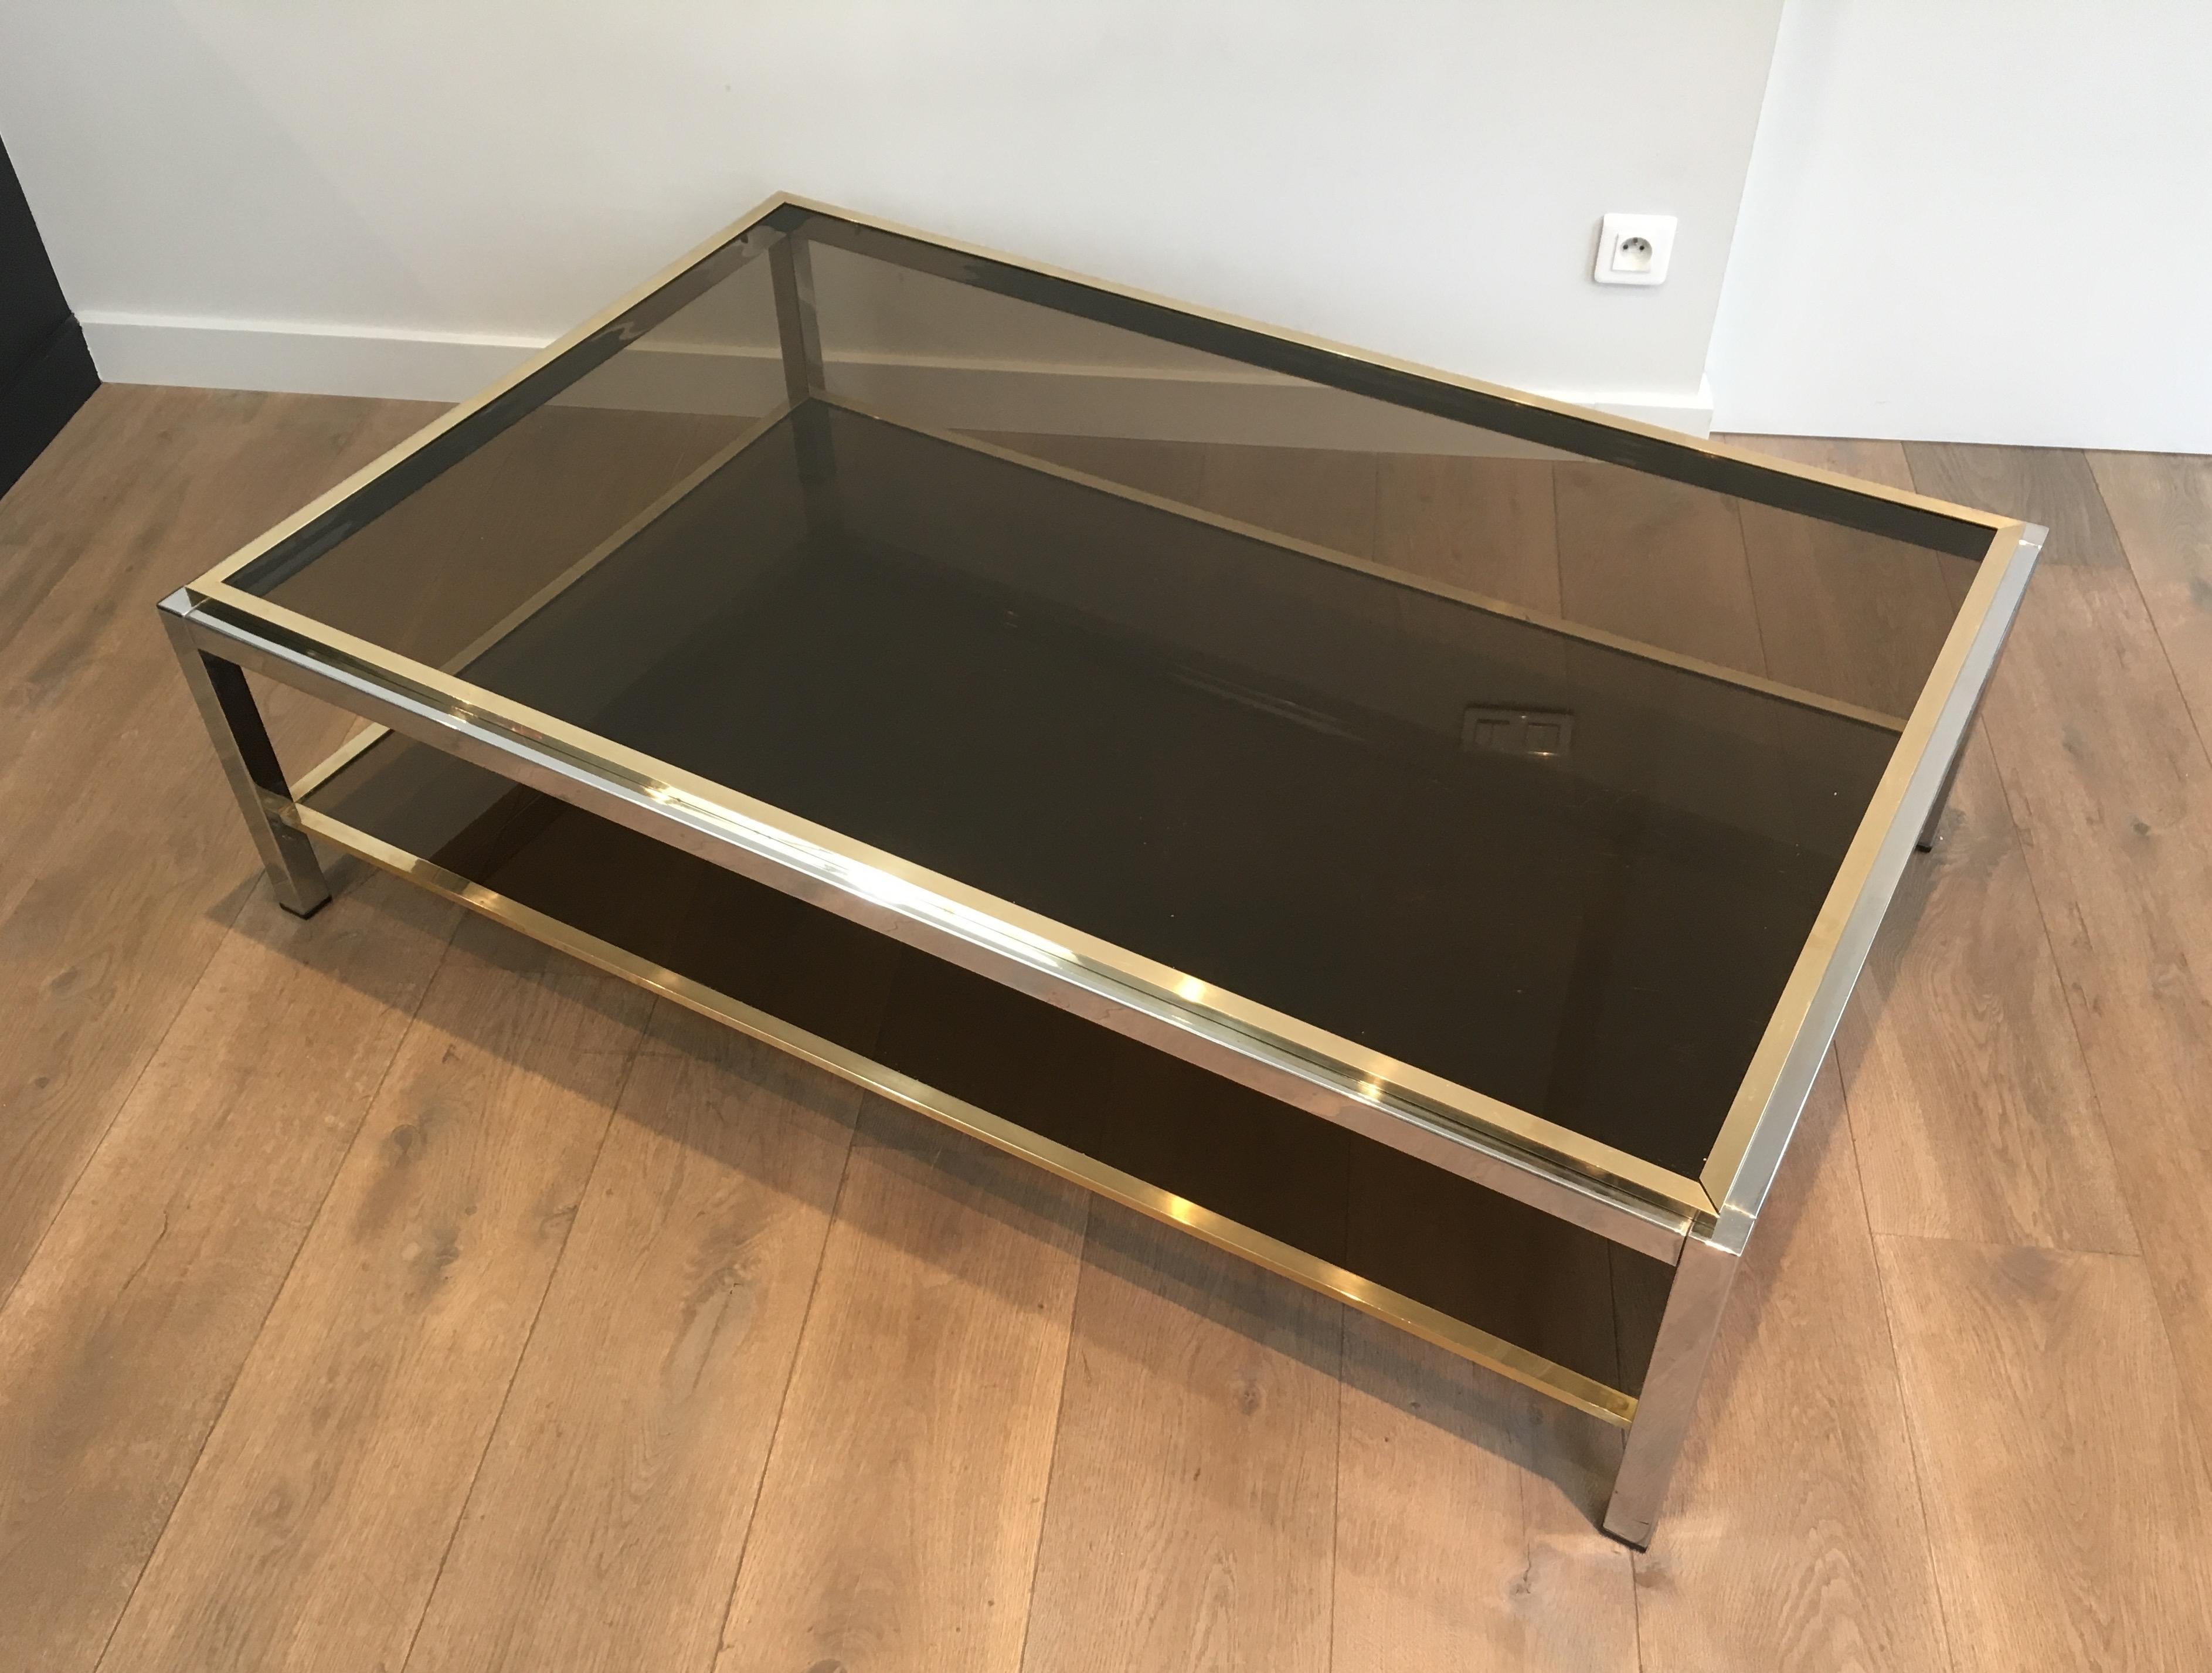 This beautiful large coffee table is made of chrome and brass with bronzed glass shelves. The top and bottom glass shelves are inserted in a brass frame constituted of 4 elements. The quality of this coffee table is very good. This is a model